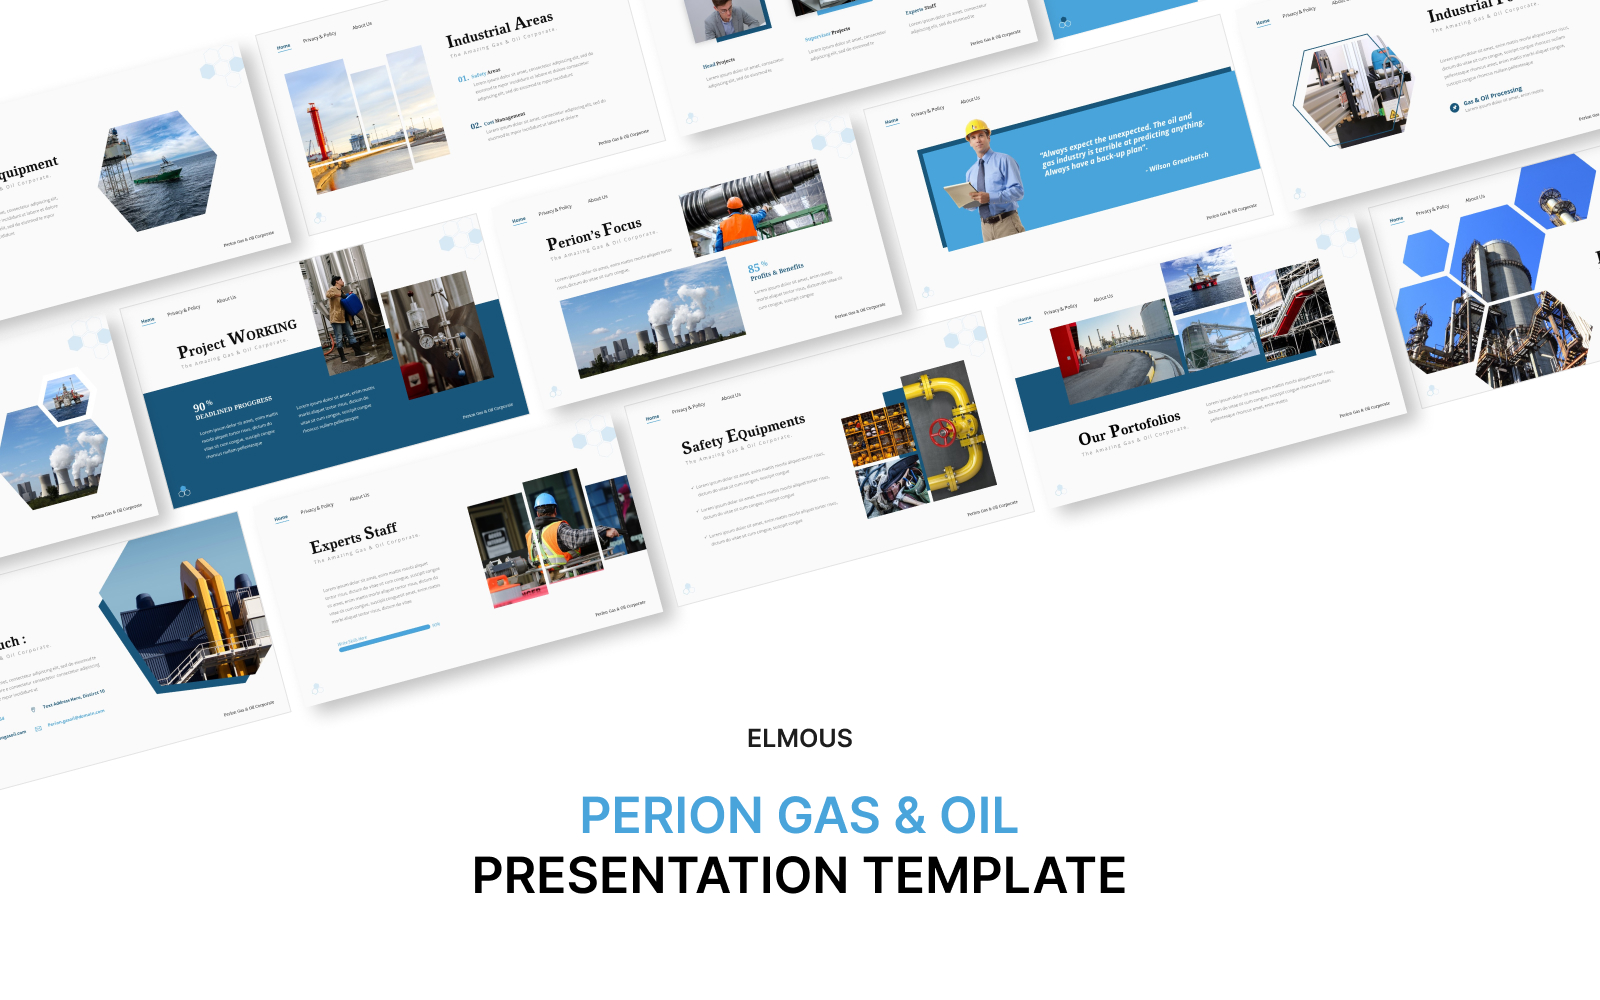 Perion Gas & Oil Powerpoint Presentation Template